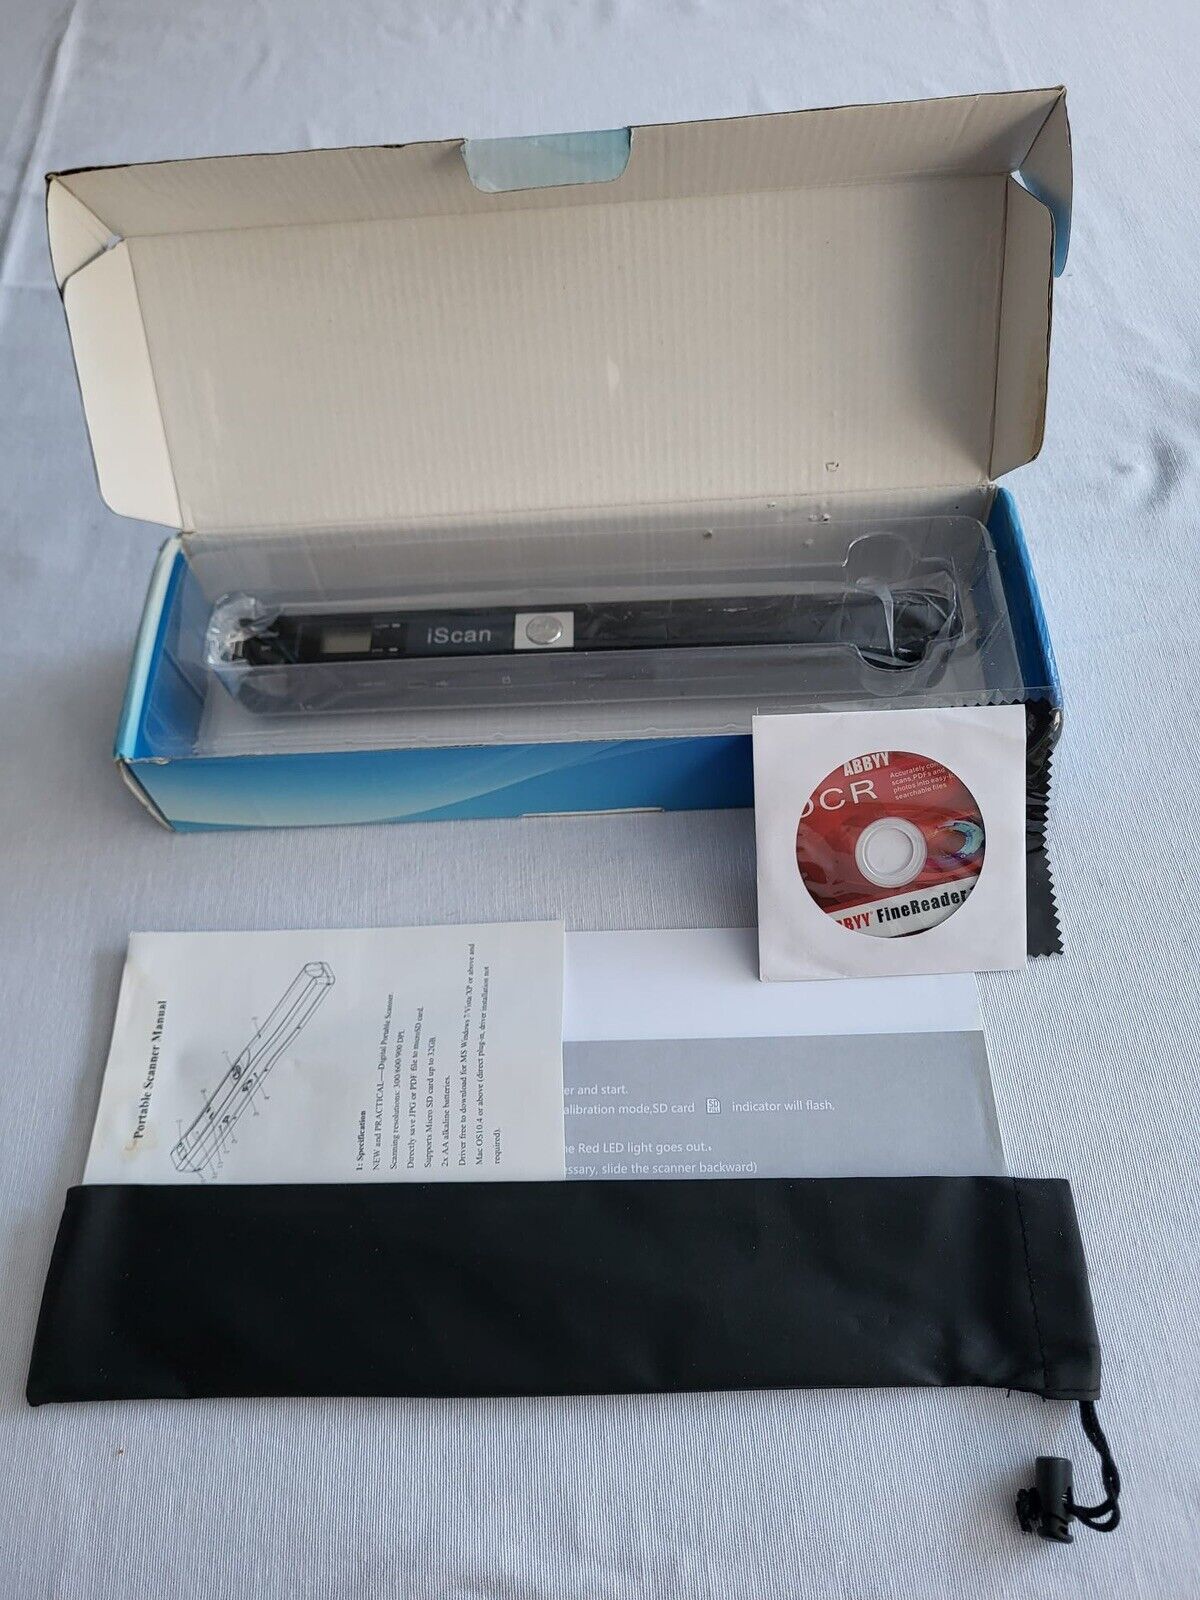 iScan Wand Portable Scanner Compact JPEG/PDF 900 DPI, Up to 32GB